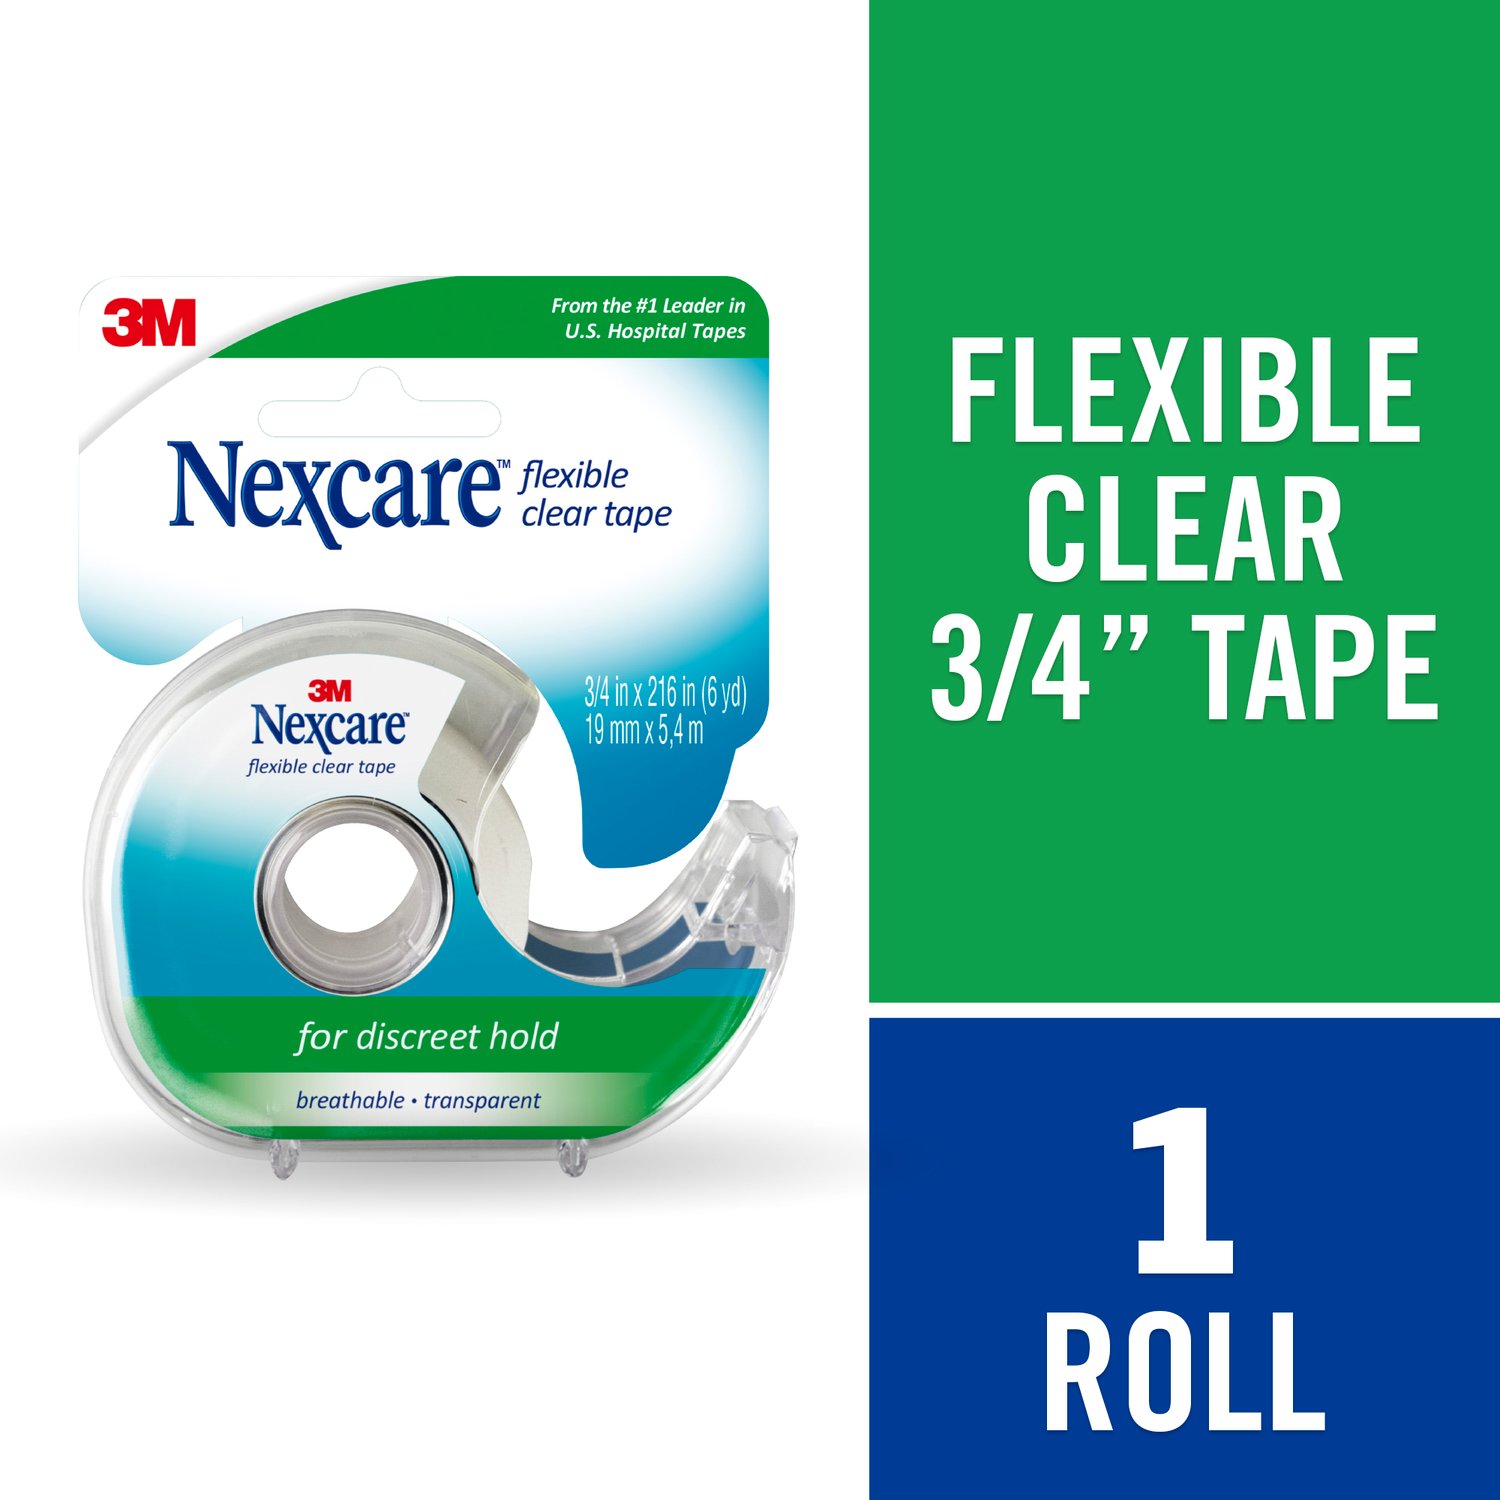 7100170072 - Nexcare Flexible Clear First Aid Tape Dispenser 779, 3/4 in x 7 yd